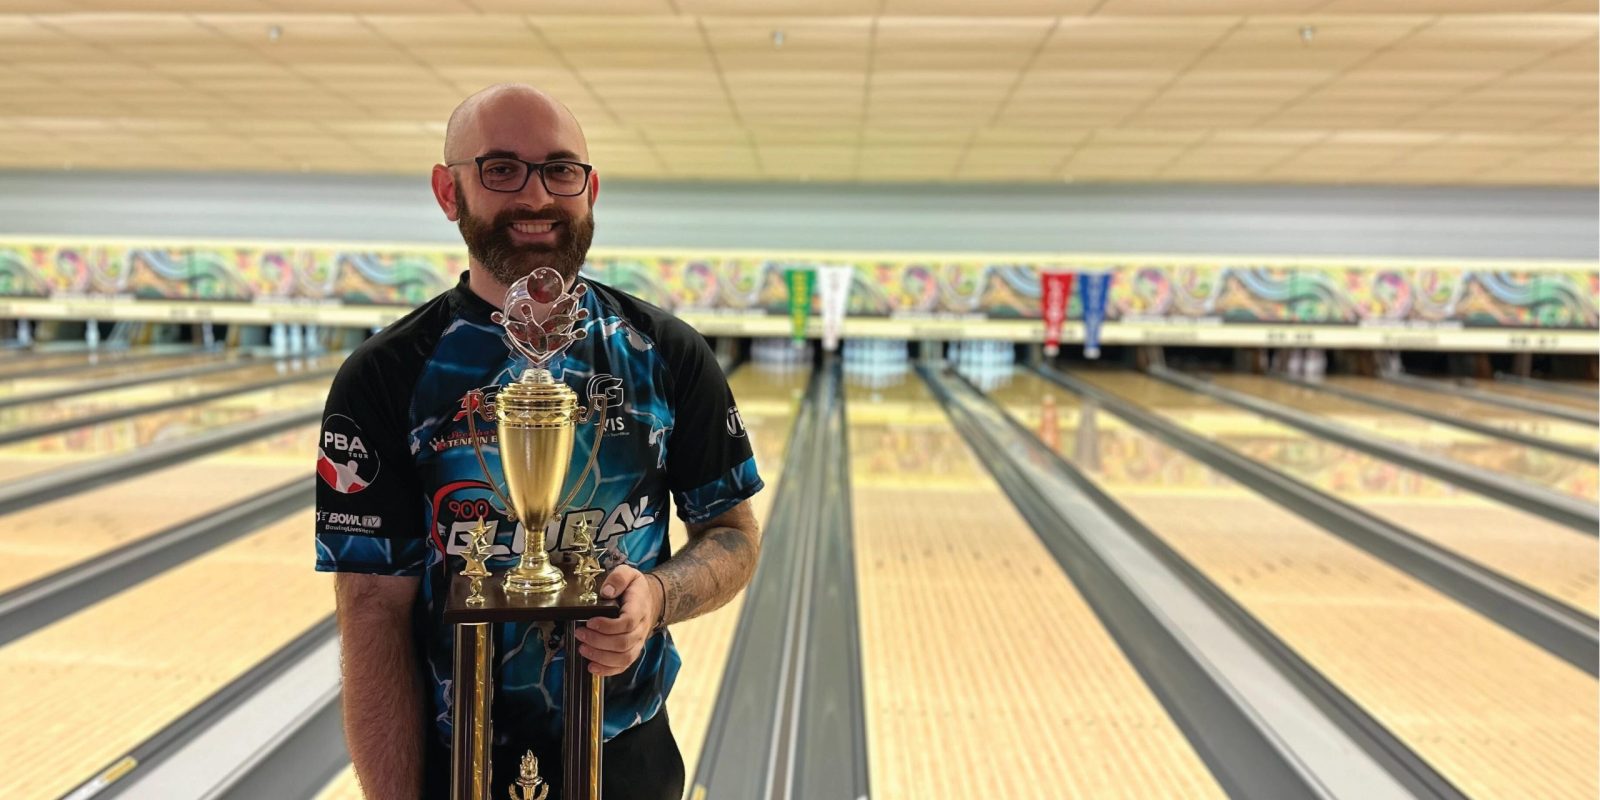 A man holds a trophy while standing next to bowling lanes